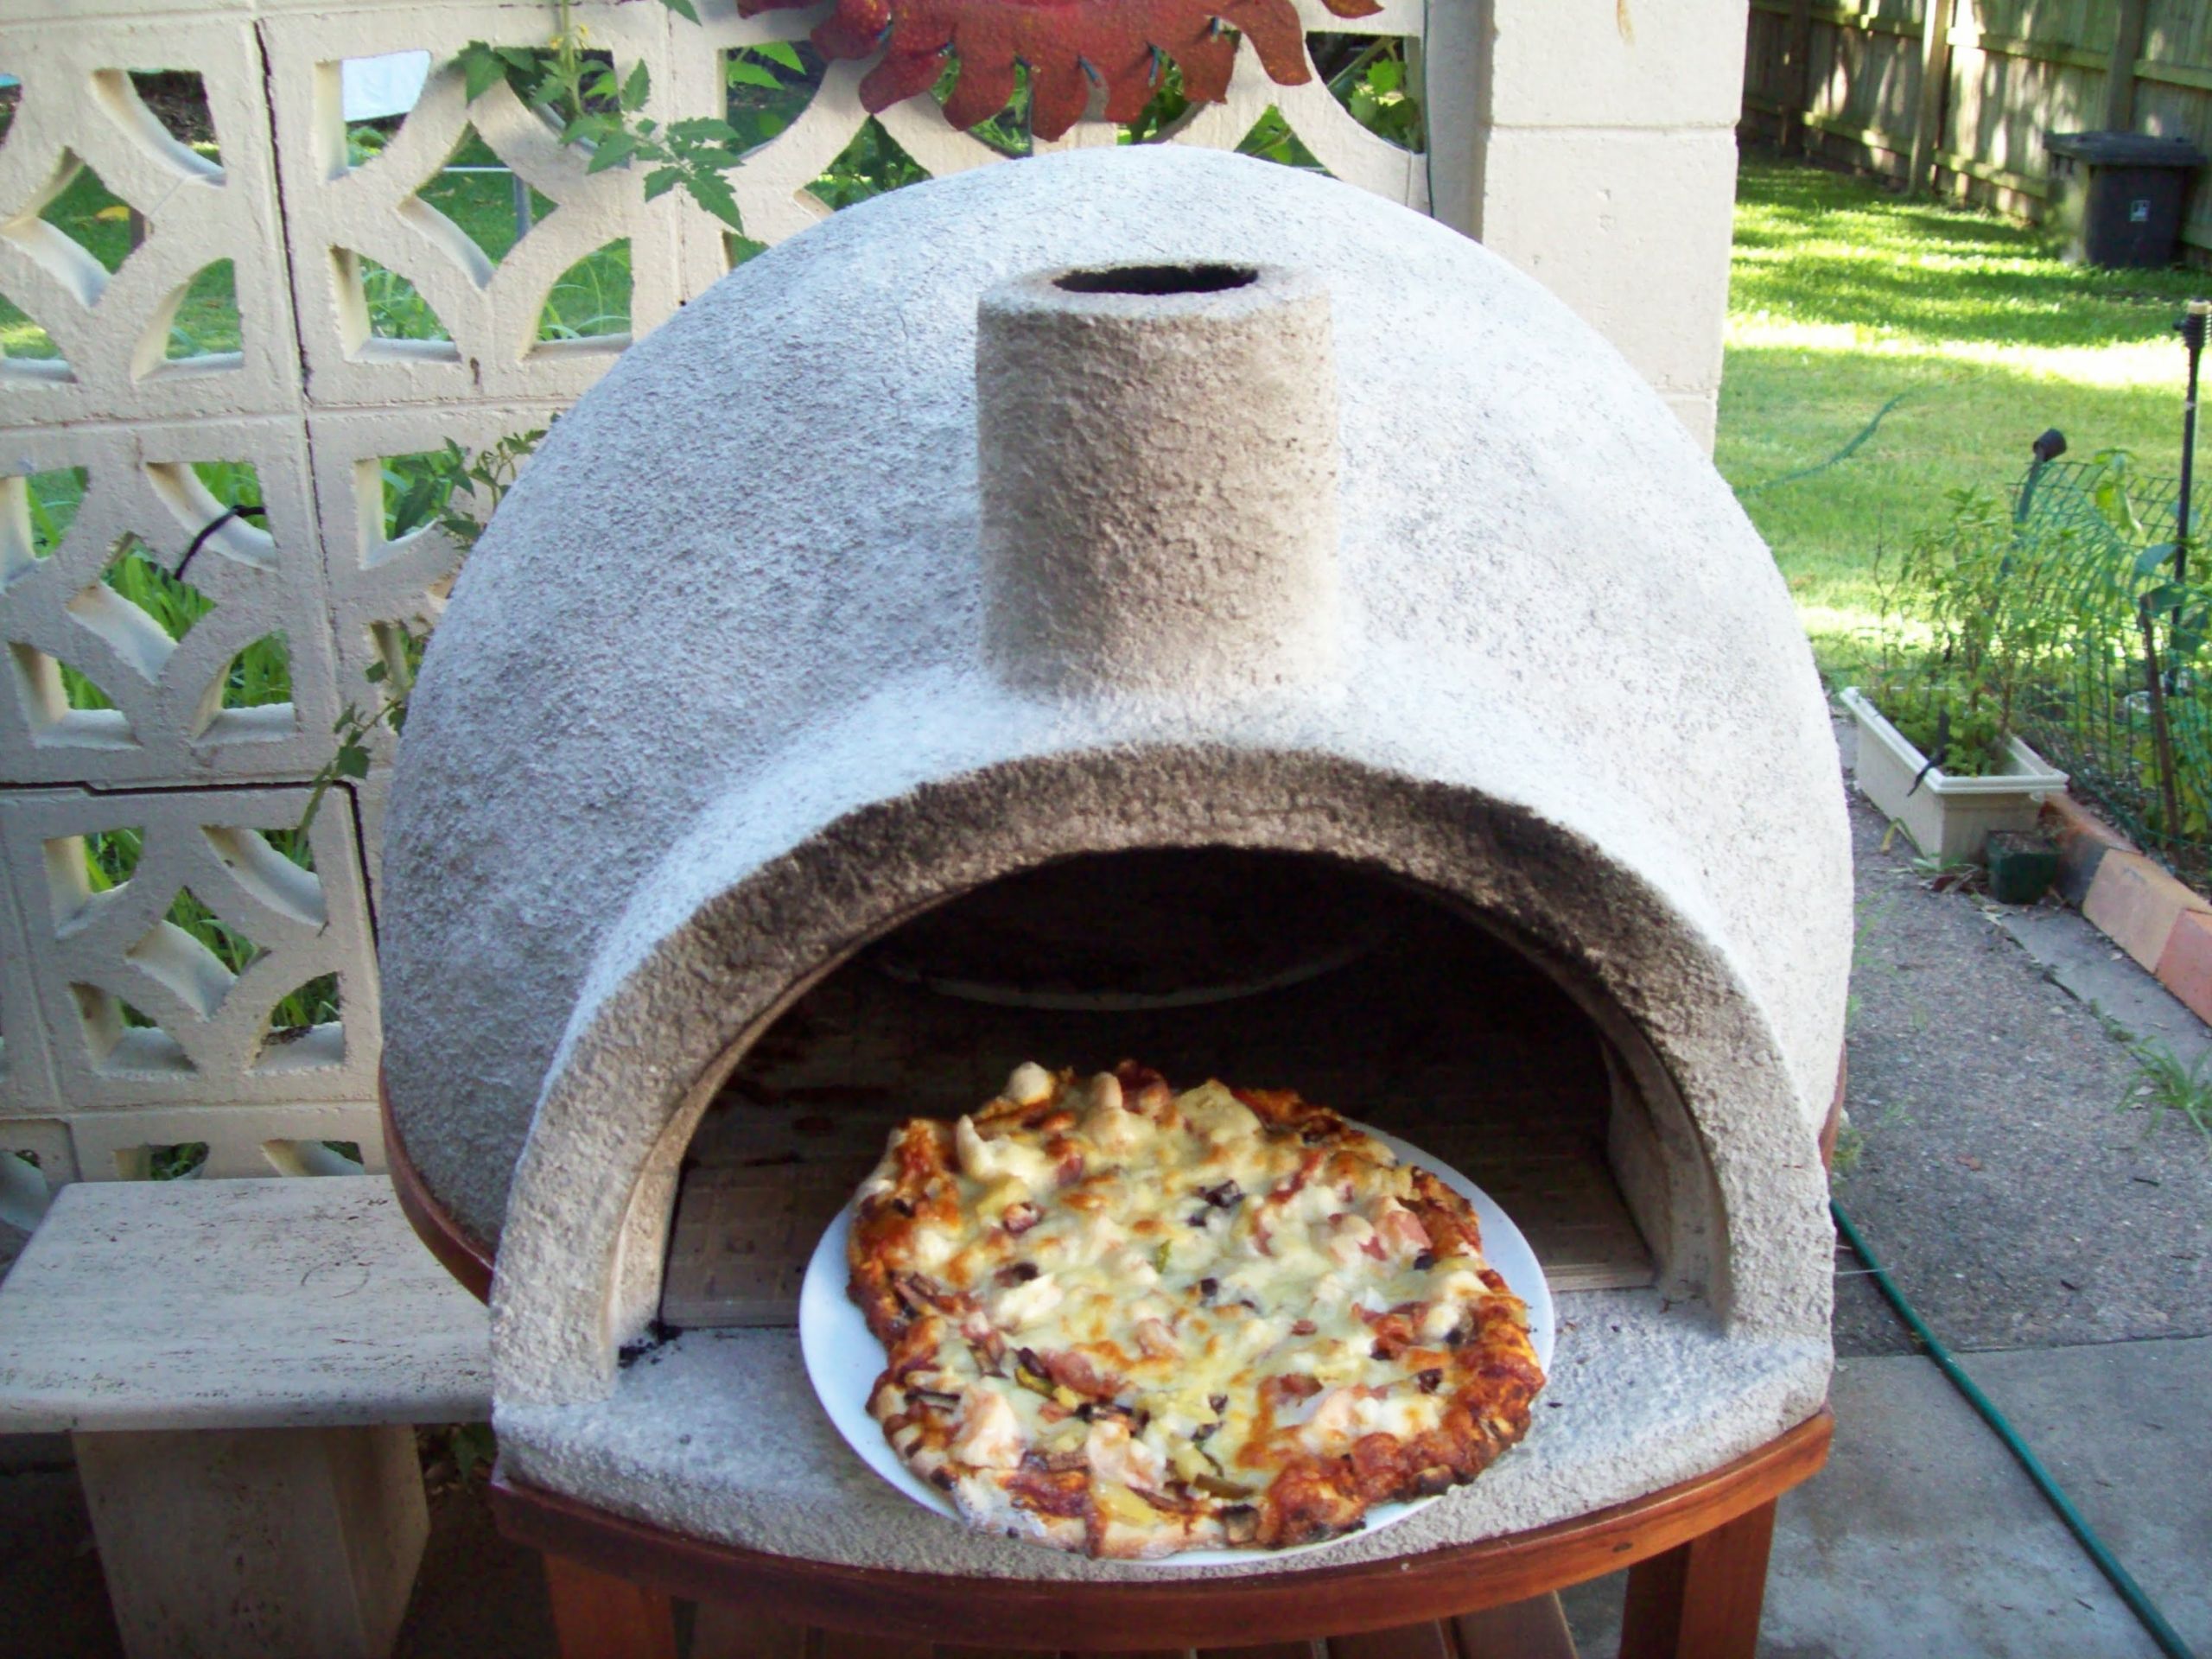 DIY Wood Ovens
 DIY Video How to Build a Backyard Wood Fire Pizza Oven